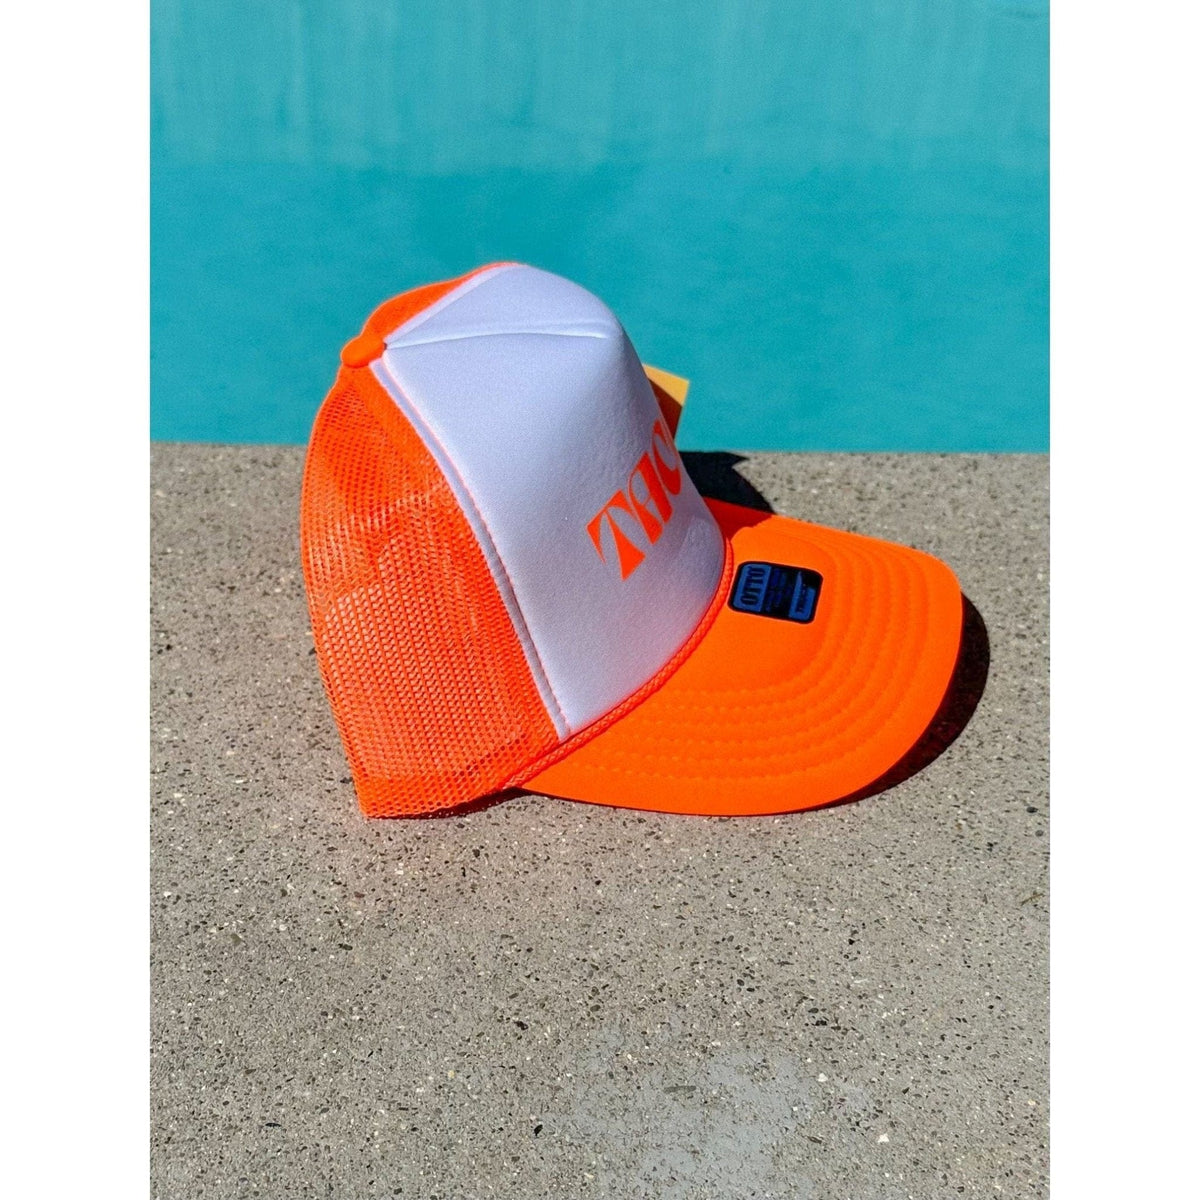 Tacos | Bright Orange & White Trucker Hat by Haute Sheet Hats TheFringeCultureCollective